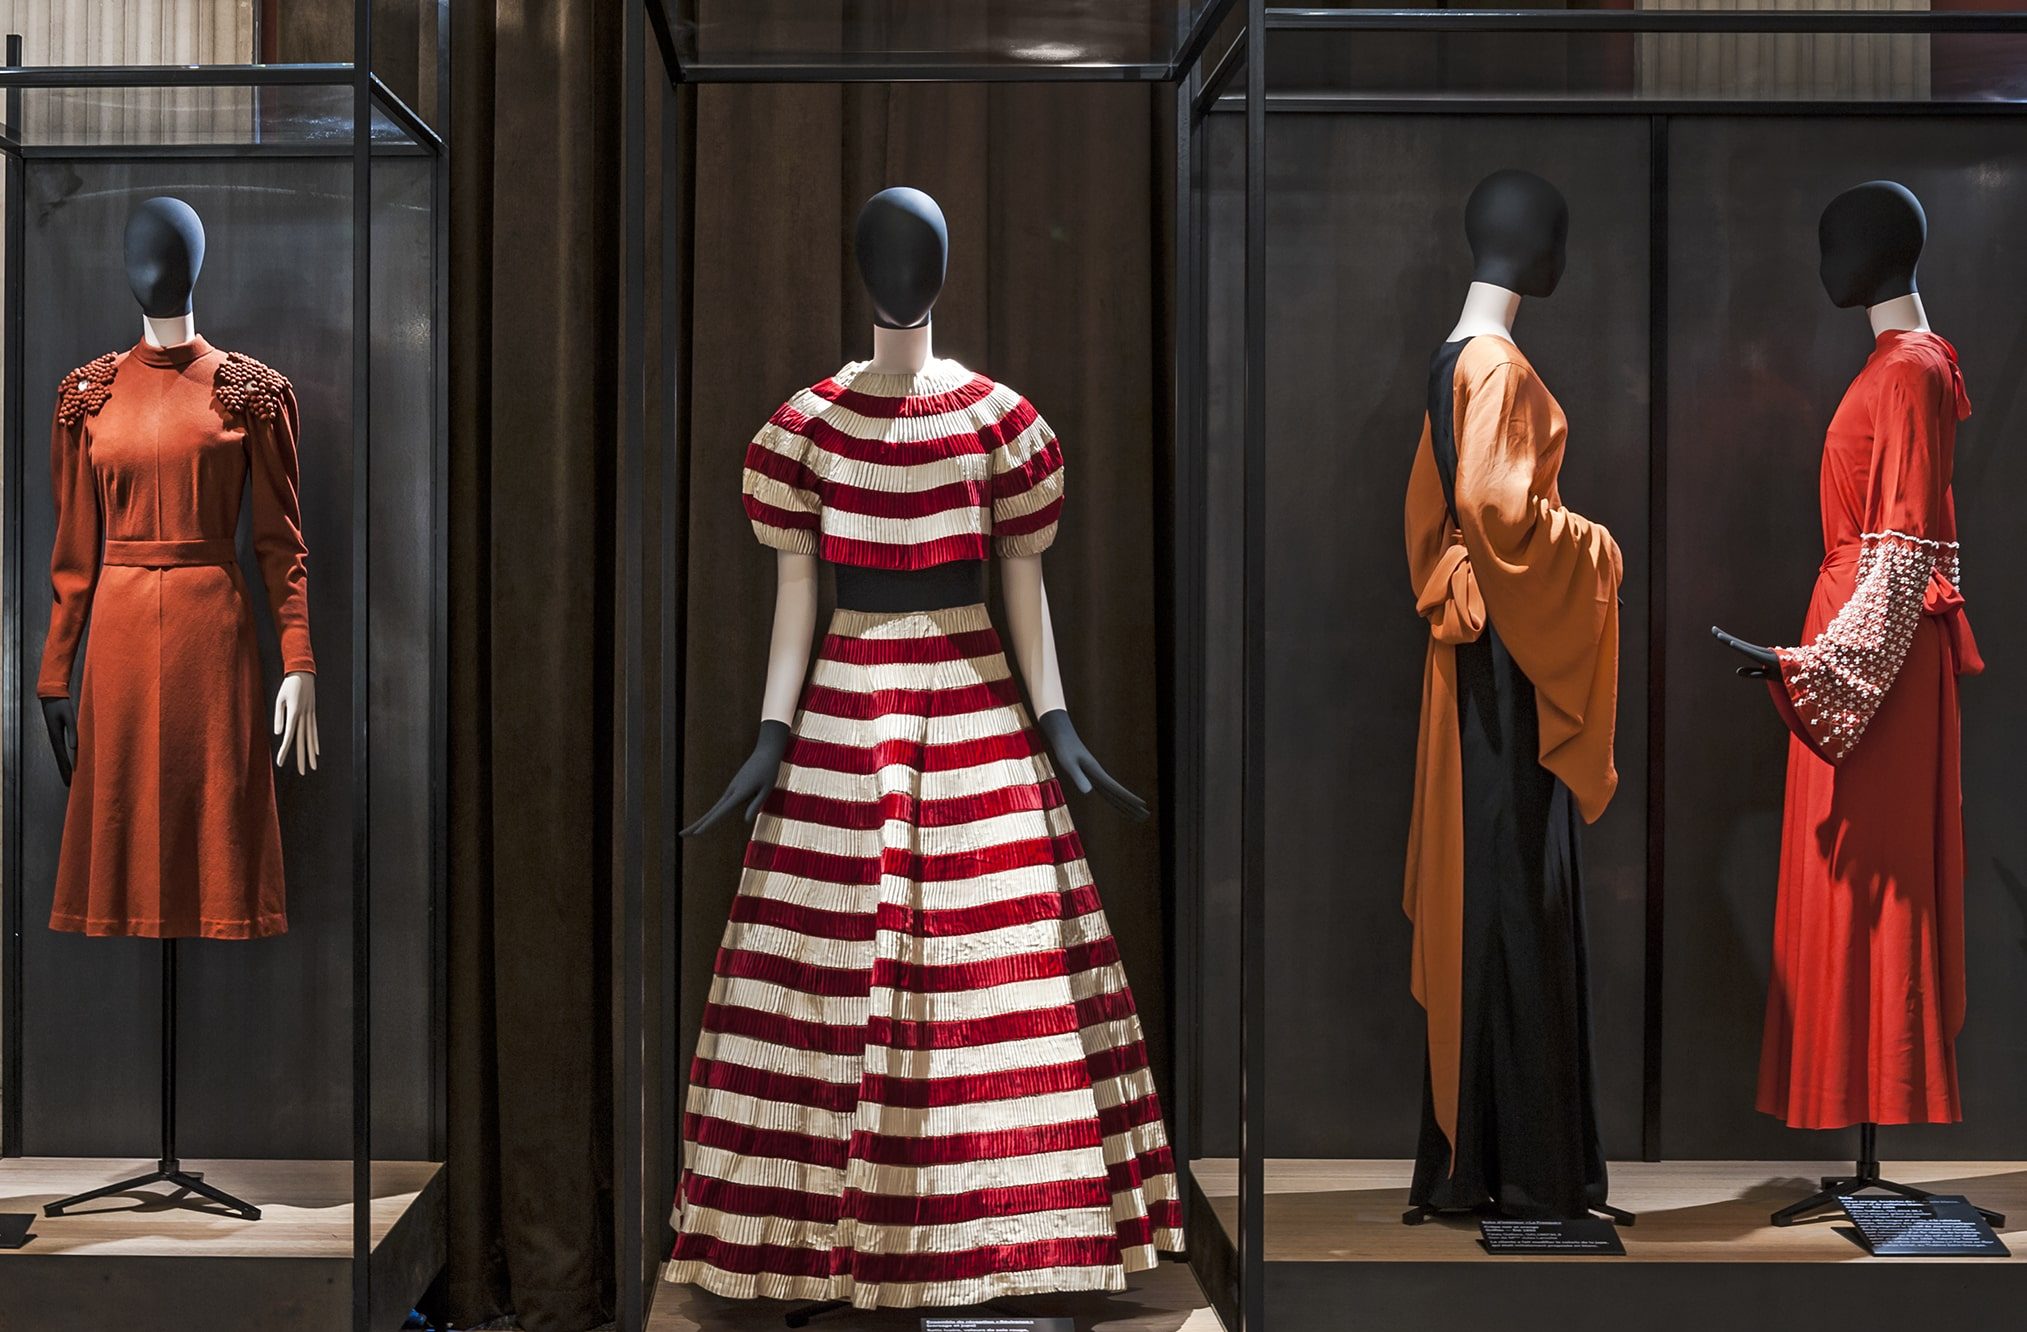 Seven Of The World's Best Fashion Museums